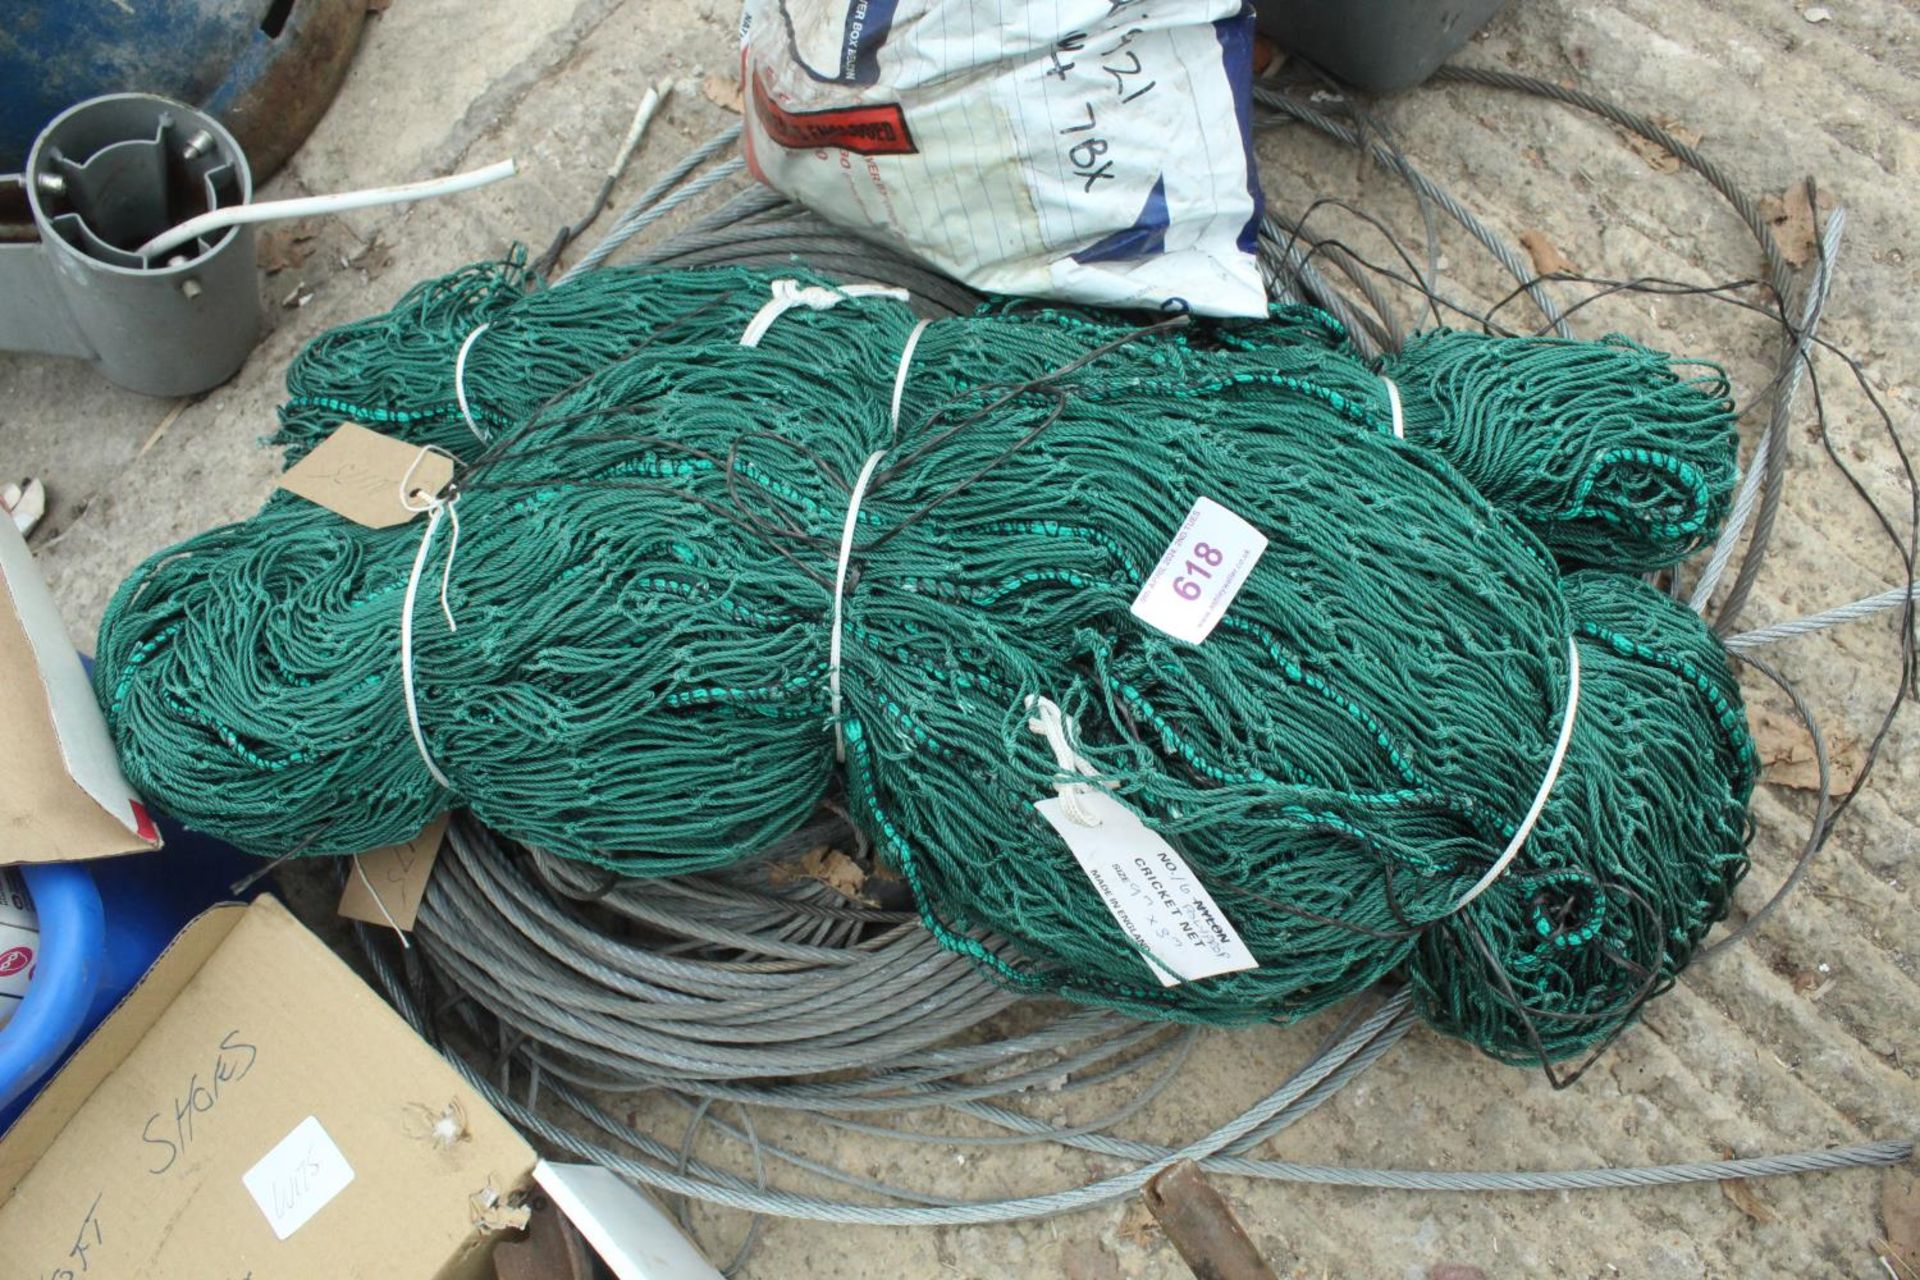 WIRE ROPE WITH FITTINGS AND NET NO VAT